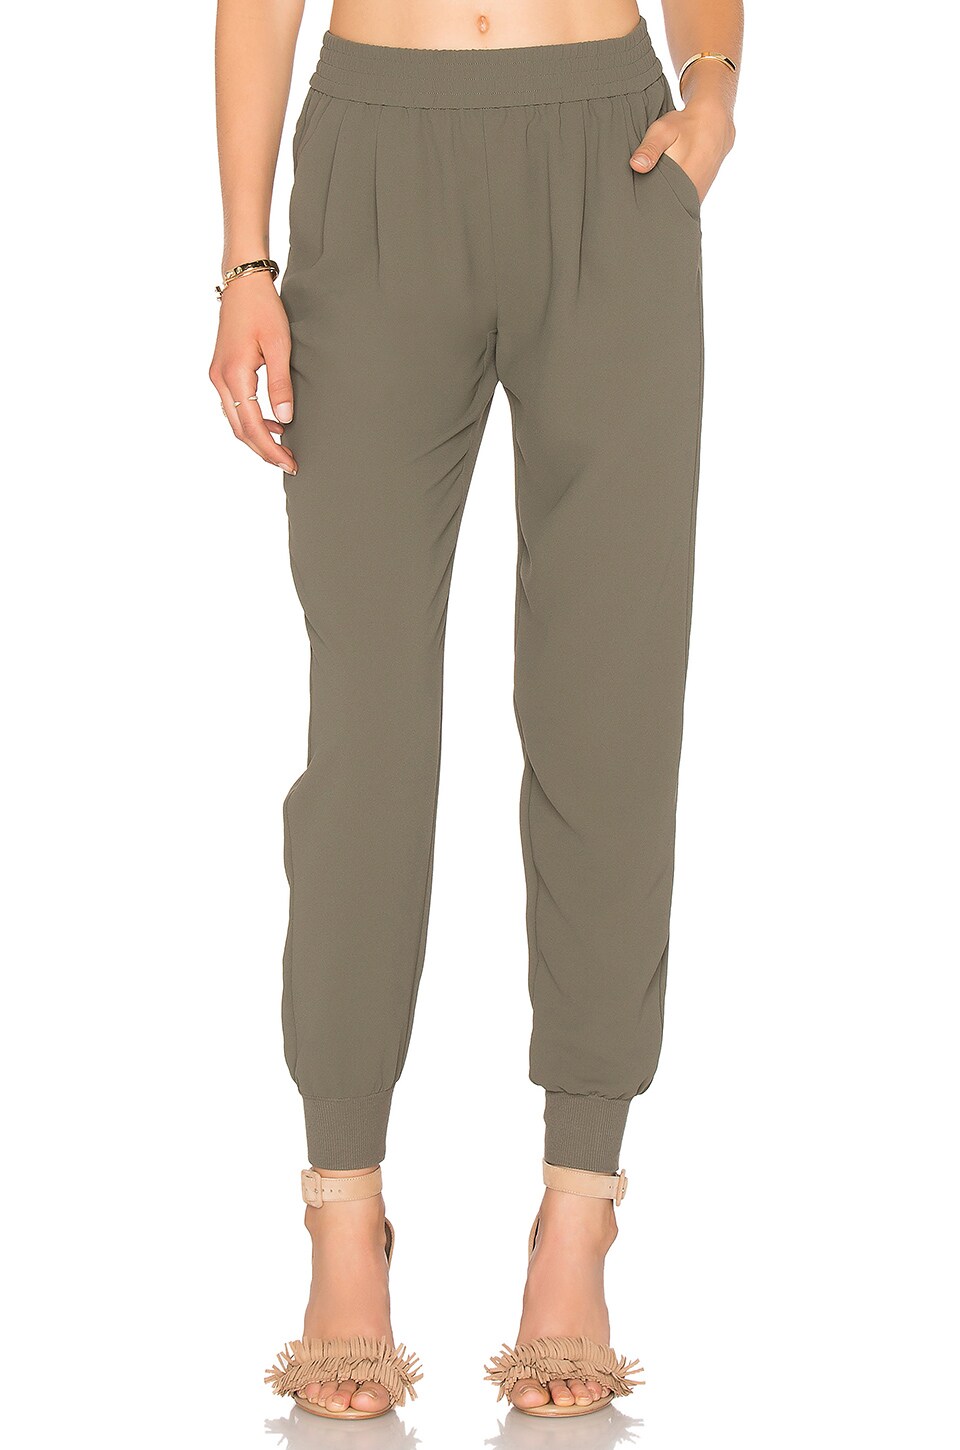 Joie Mariner Pant in Fatigue | REVOLVE